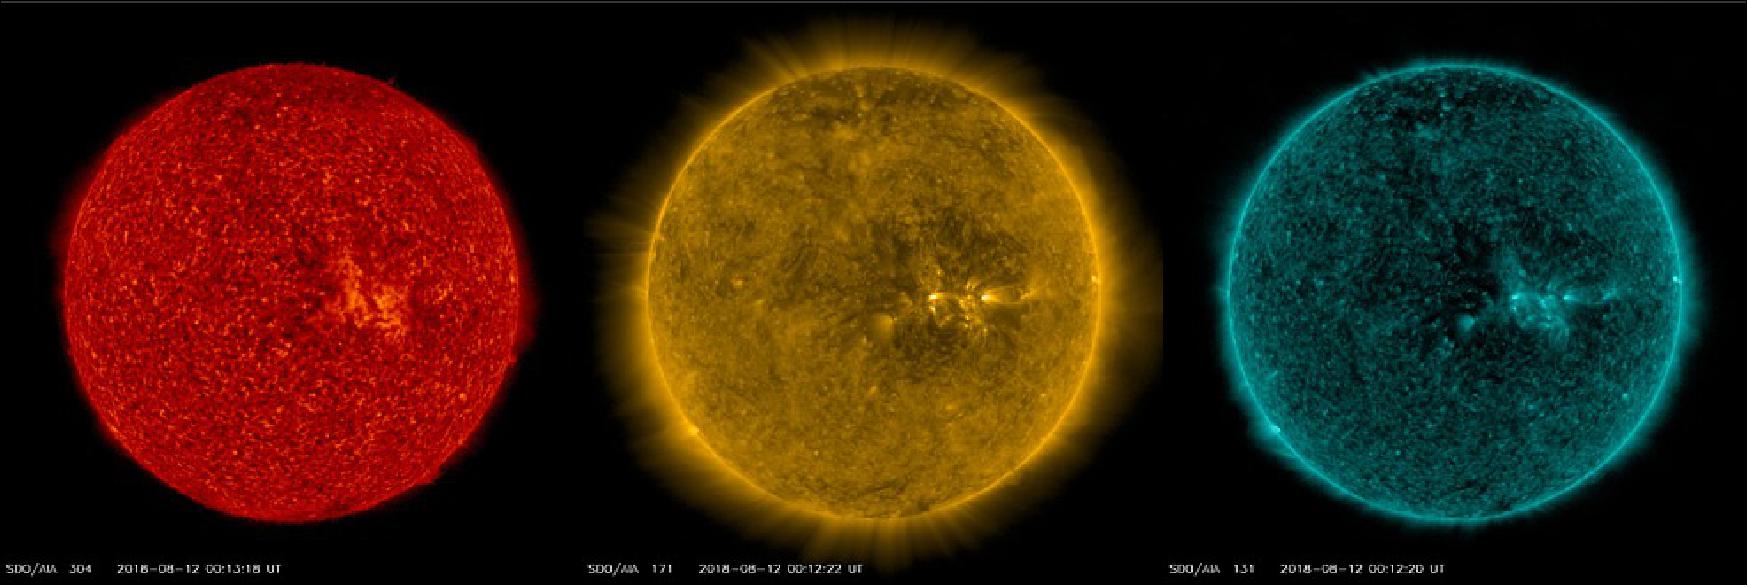 Figure 32: NASA's Solar Dynamics Observatory takes images of the Sun at different wavelengths (image credit: NASA/SDO)